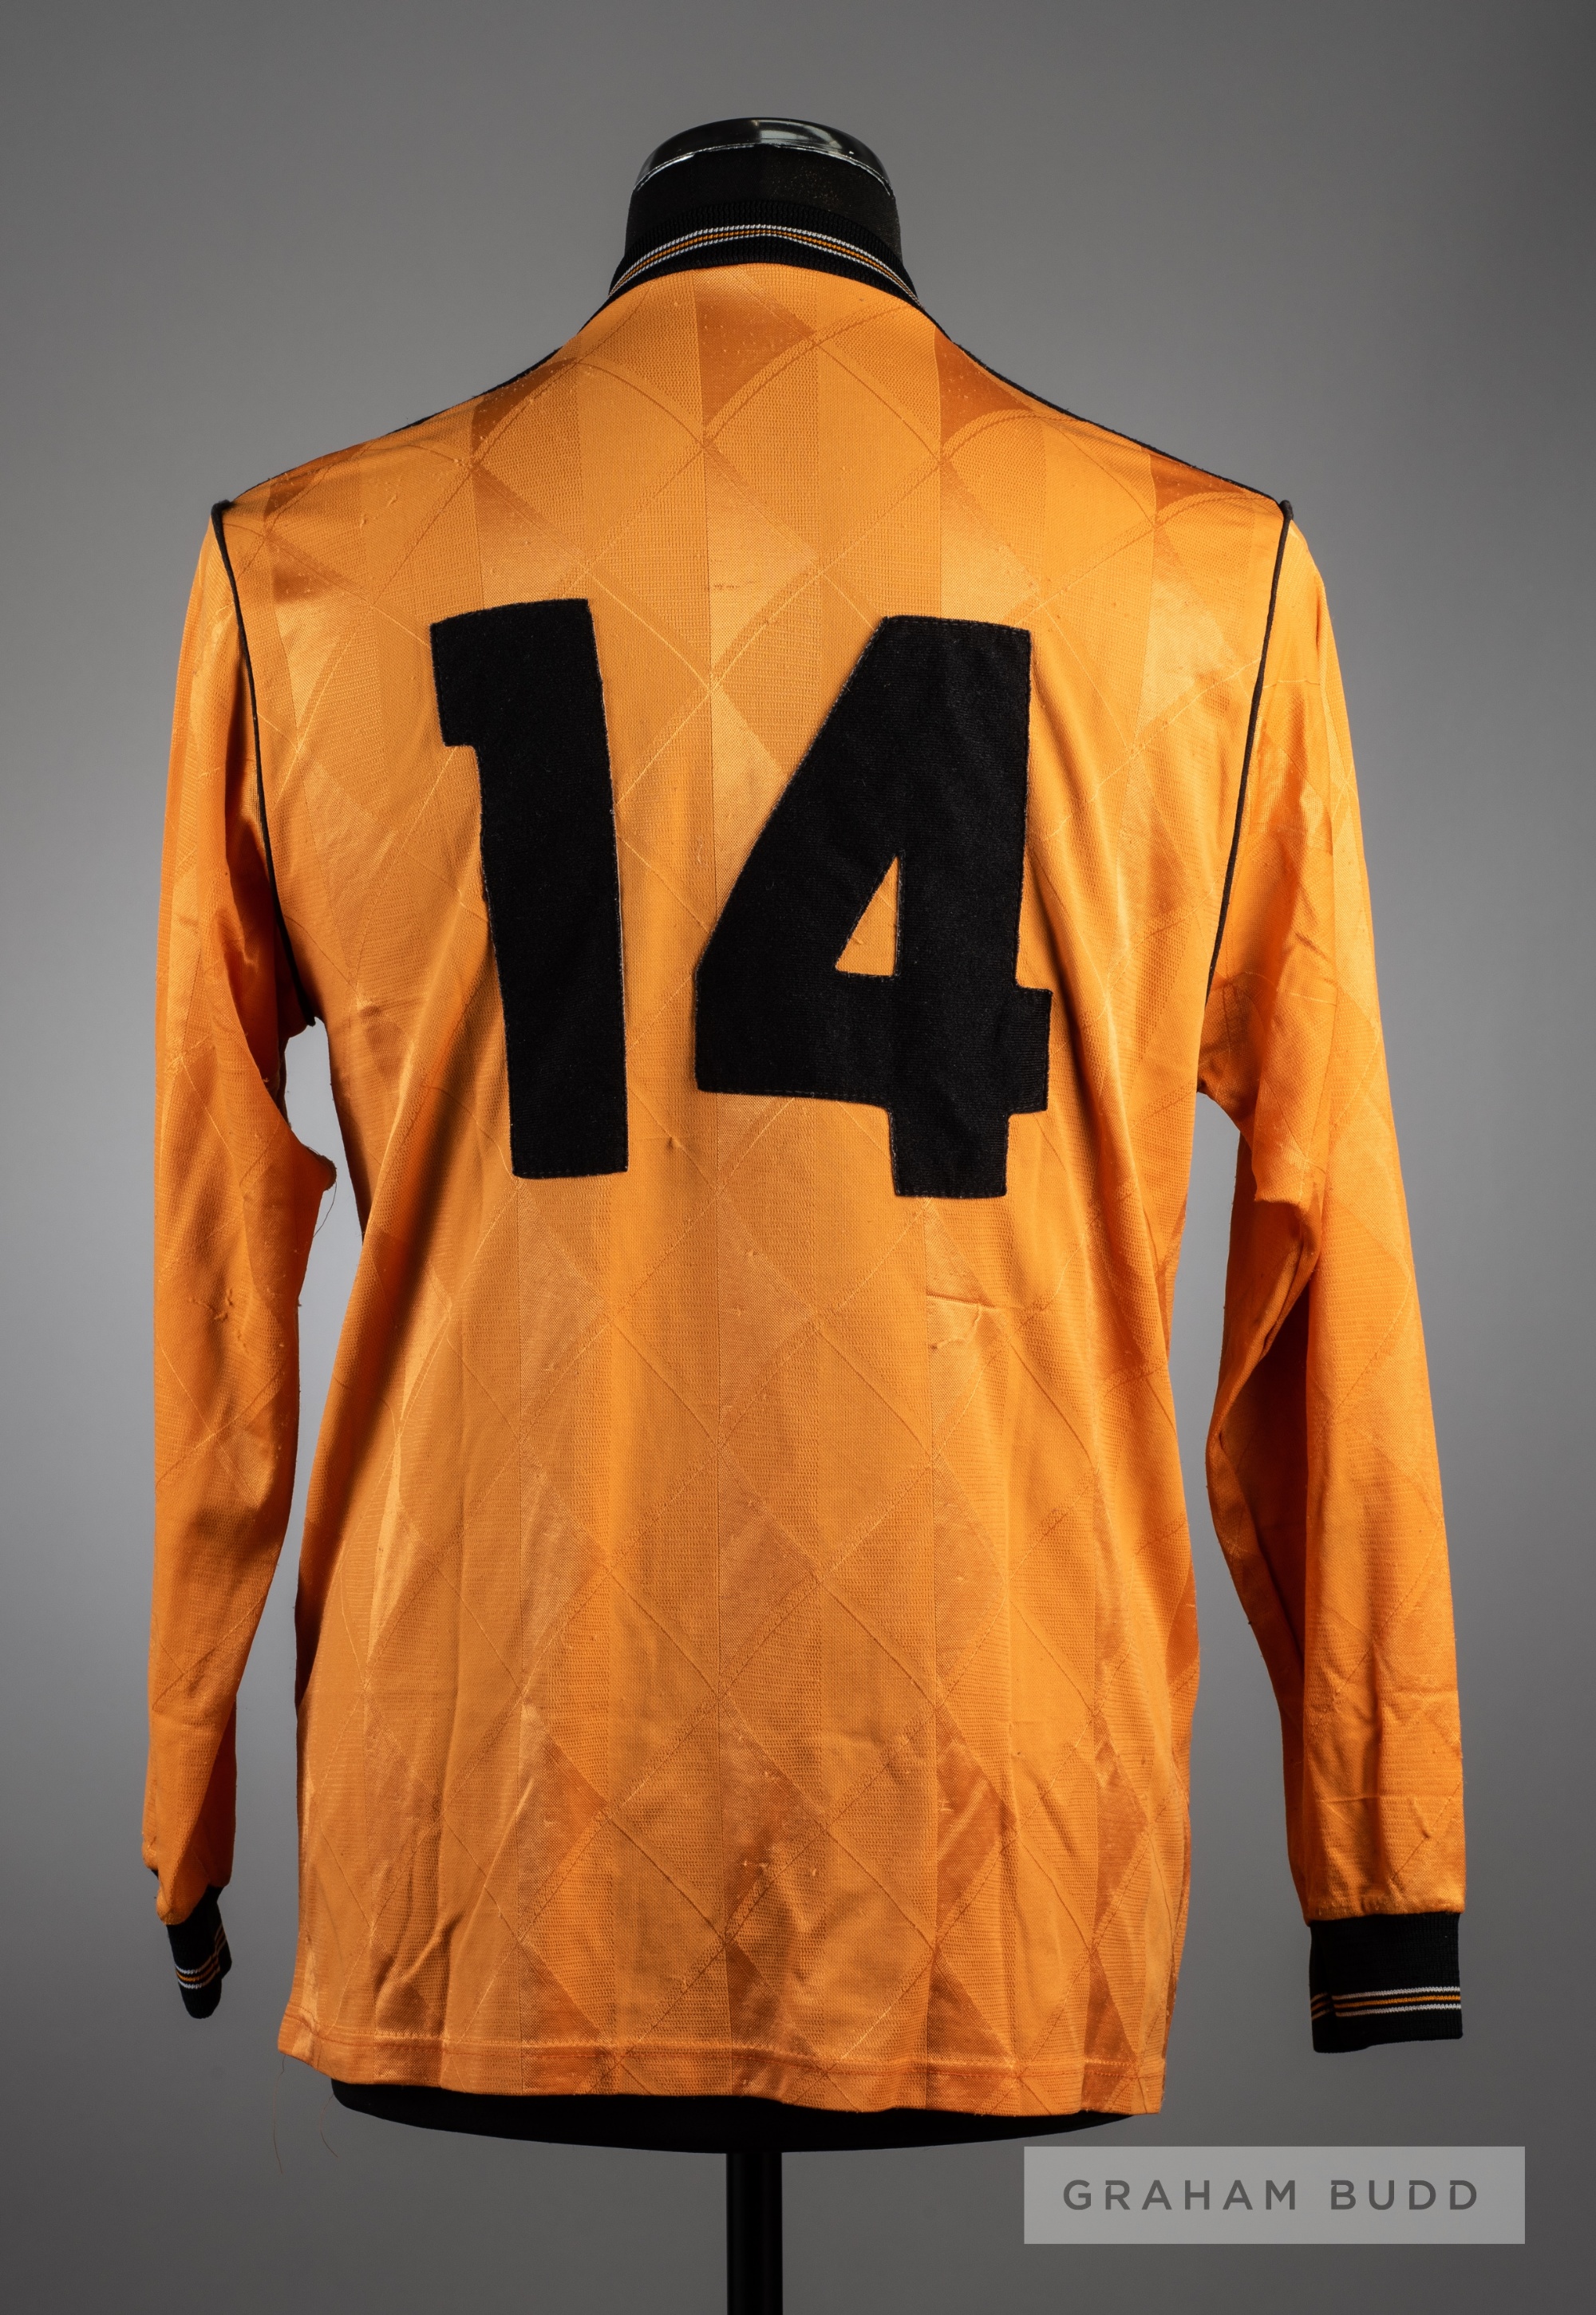 Amber Newport County AFC No.14 substitute's jersey from the club's reformation season in 1989-90, by - Image 2 of 2